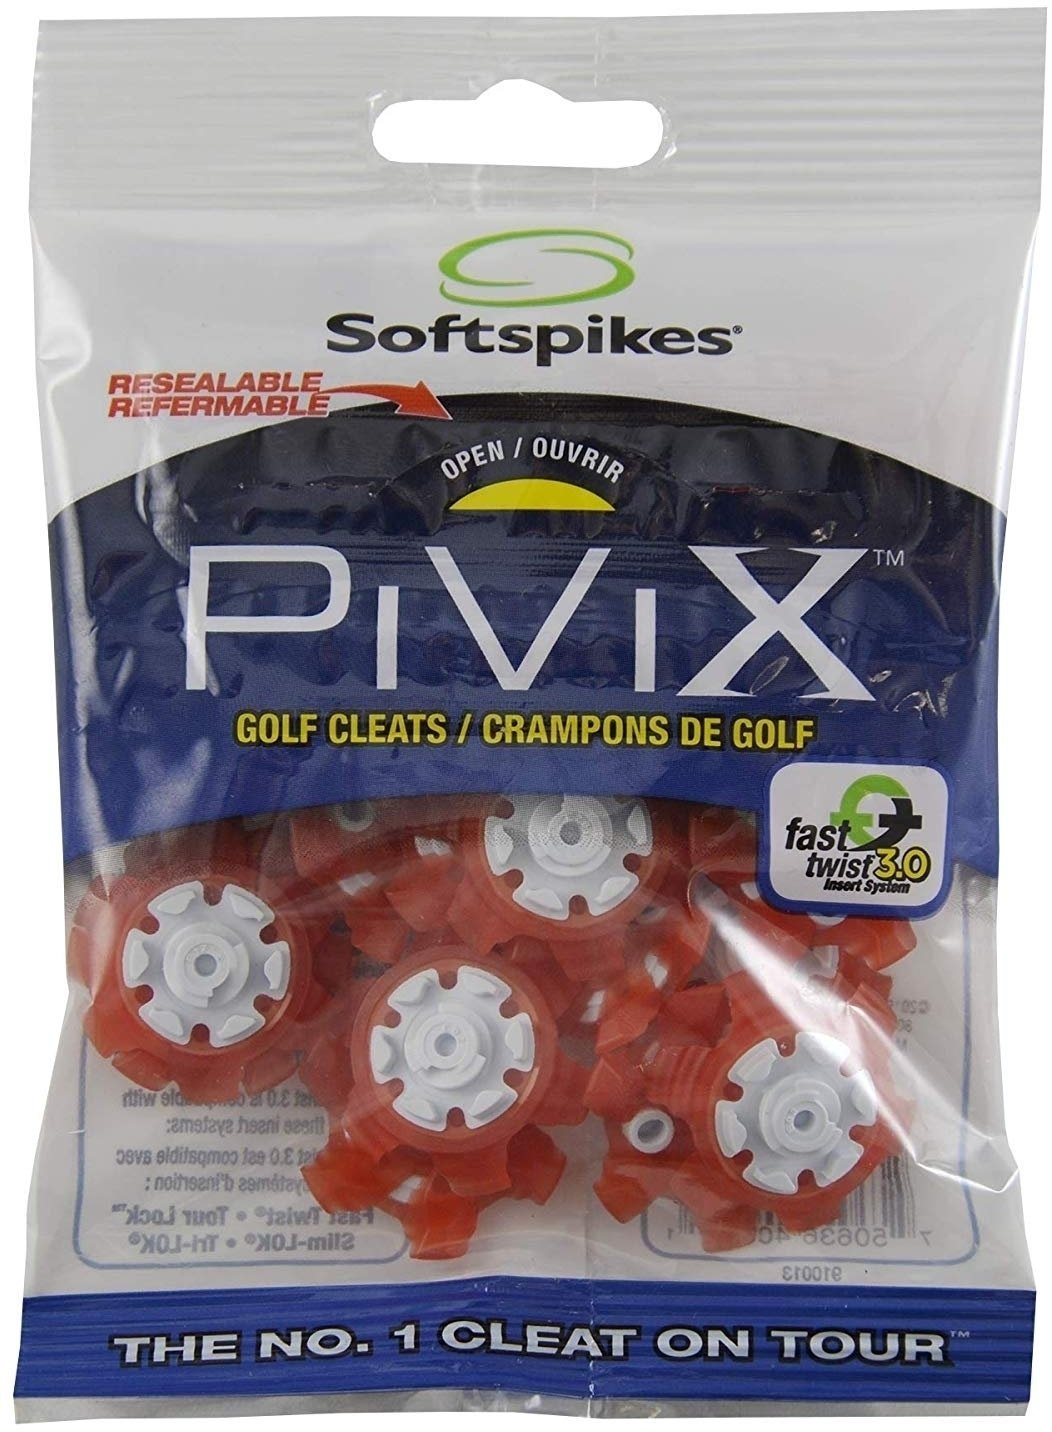 Accessories for golf shoes Softspikes Pivix Fast Twist 3.0 Red